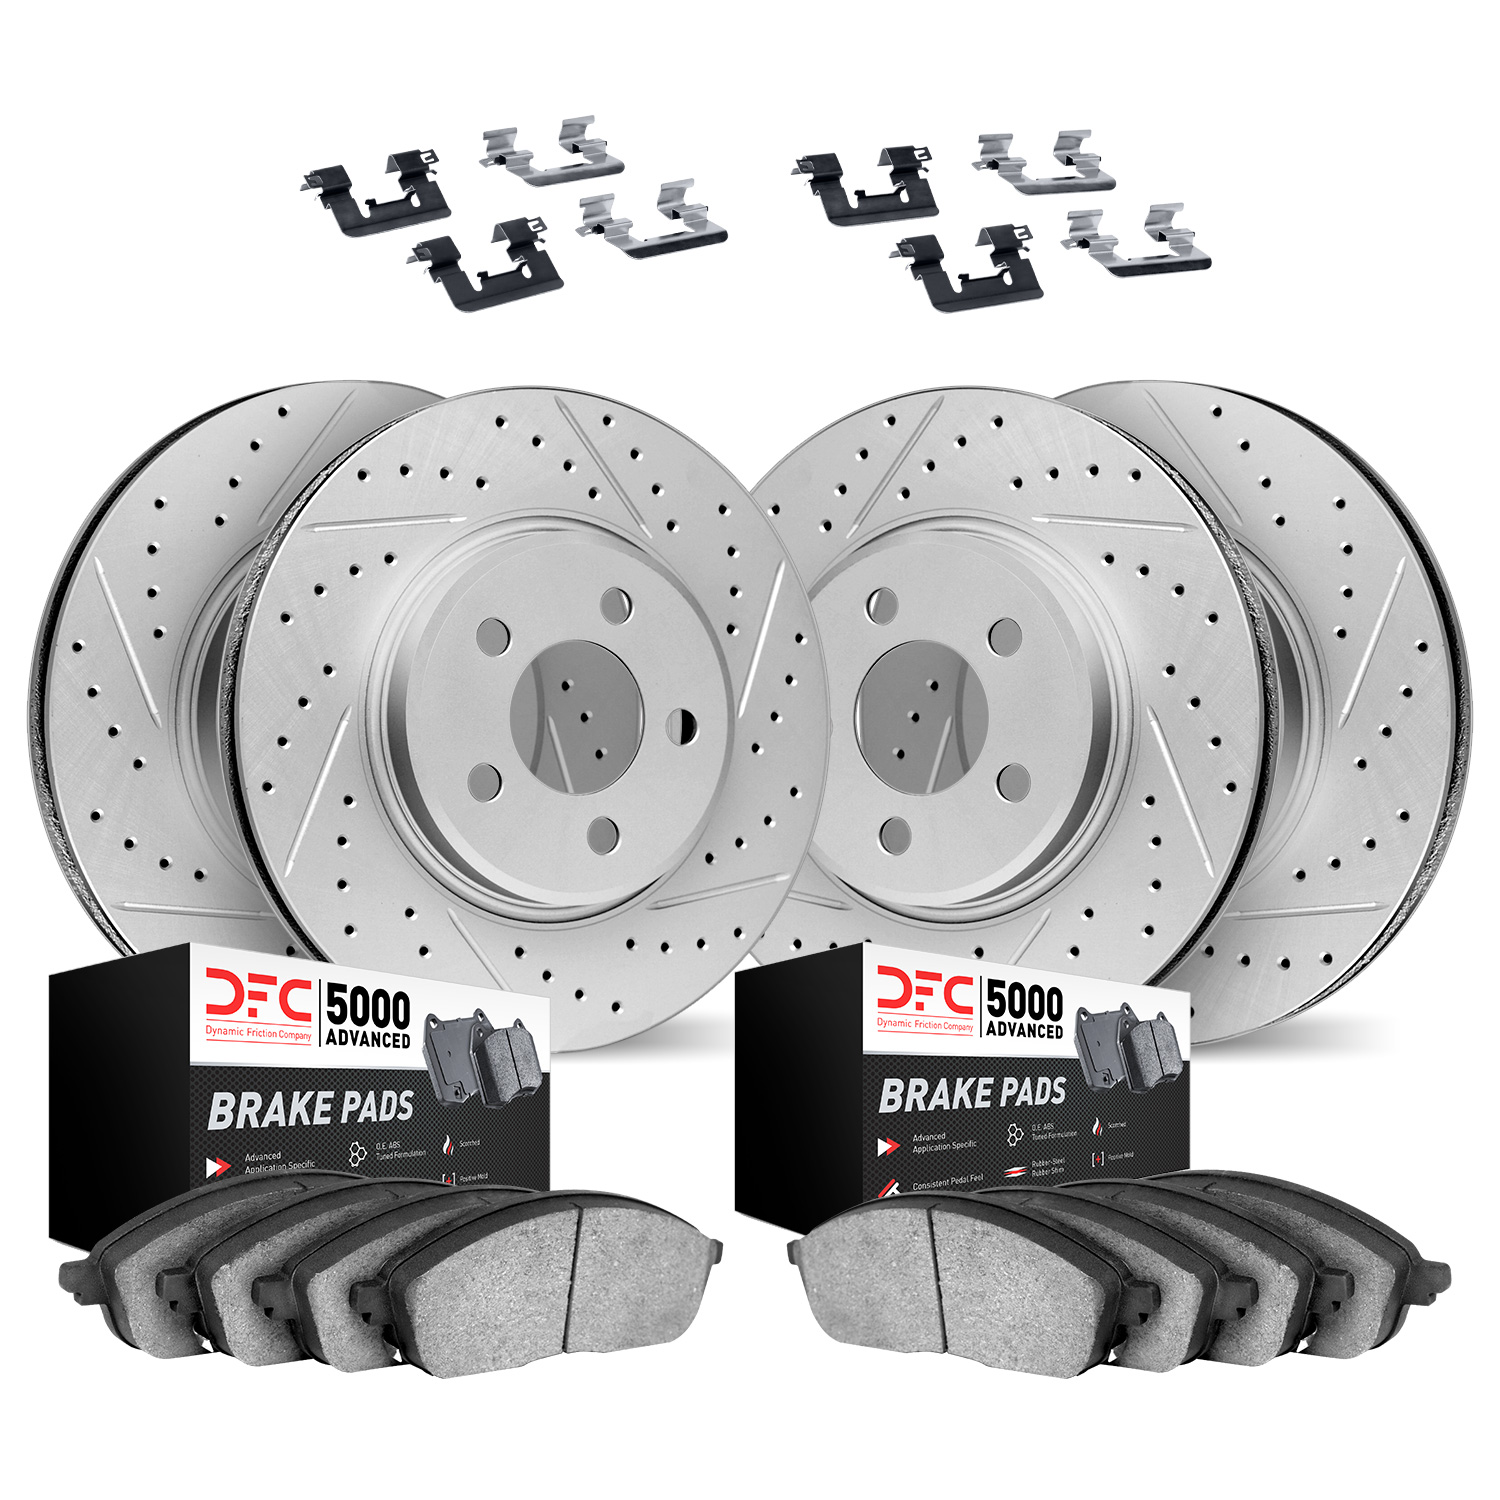 2514-31043 Geoperformance Drilled/Slotted Rotors w/5000 Advanced Brake Pads Kit & Hardware, 2007-2010 BMW, Position: Front and R